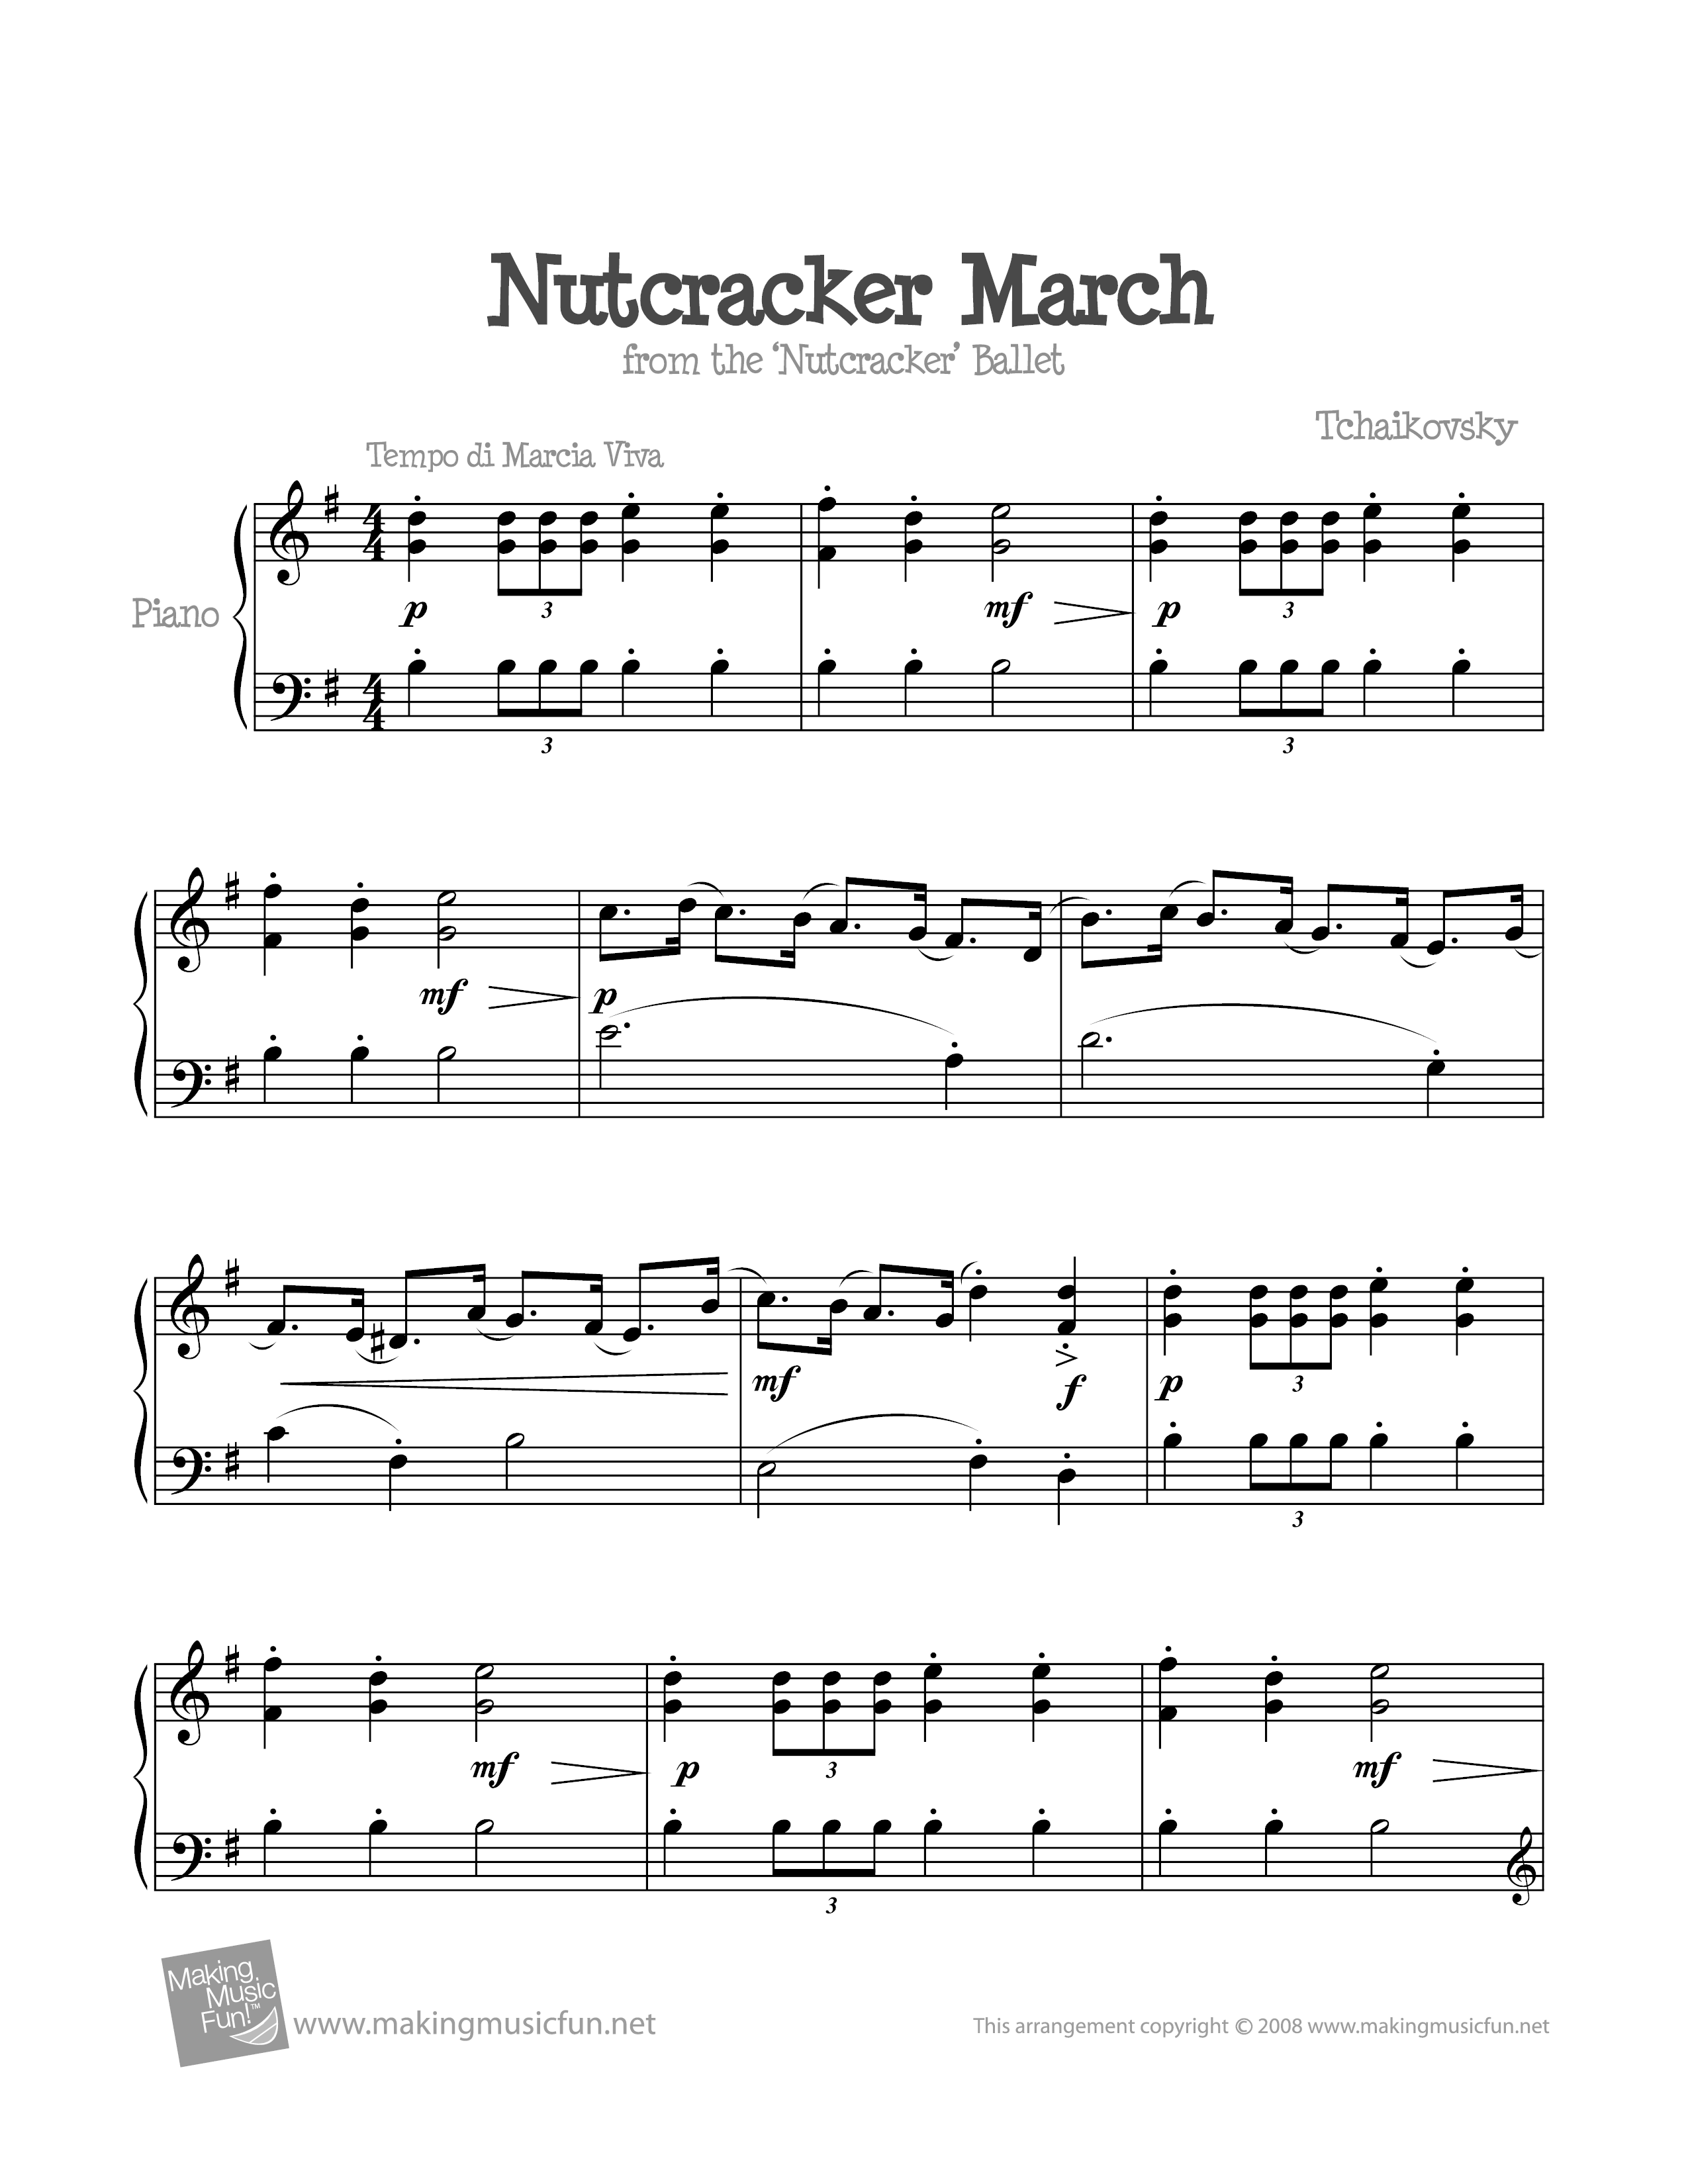 March from the Nutcracker琴谱